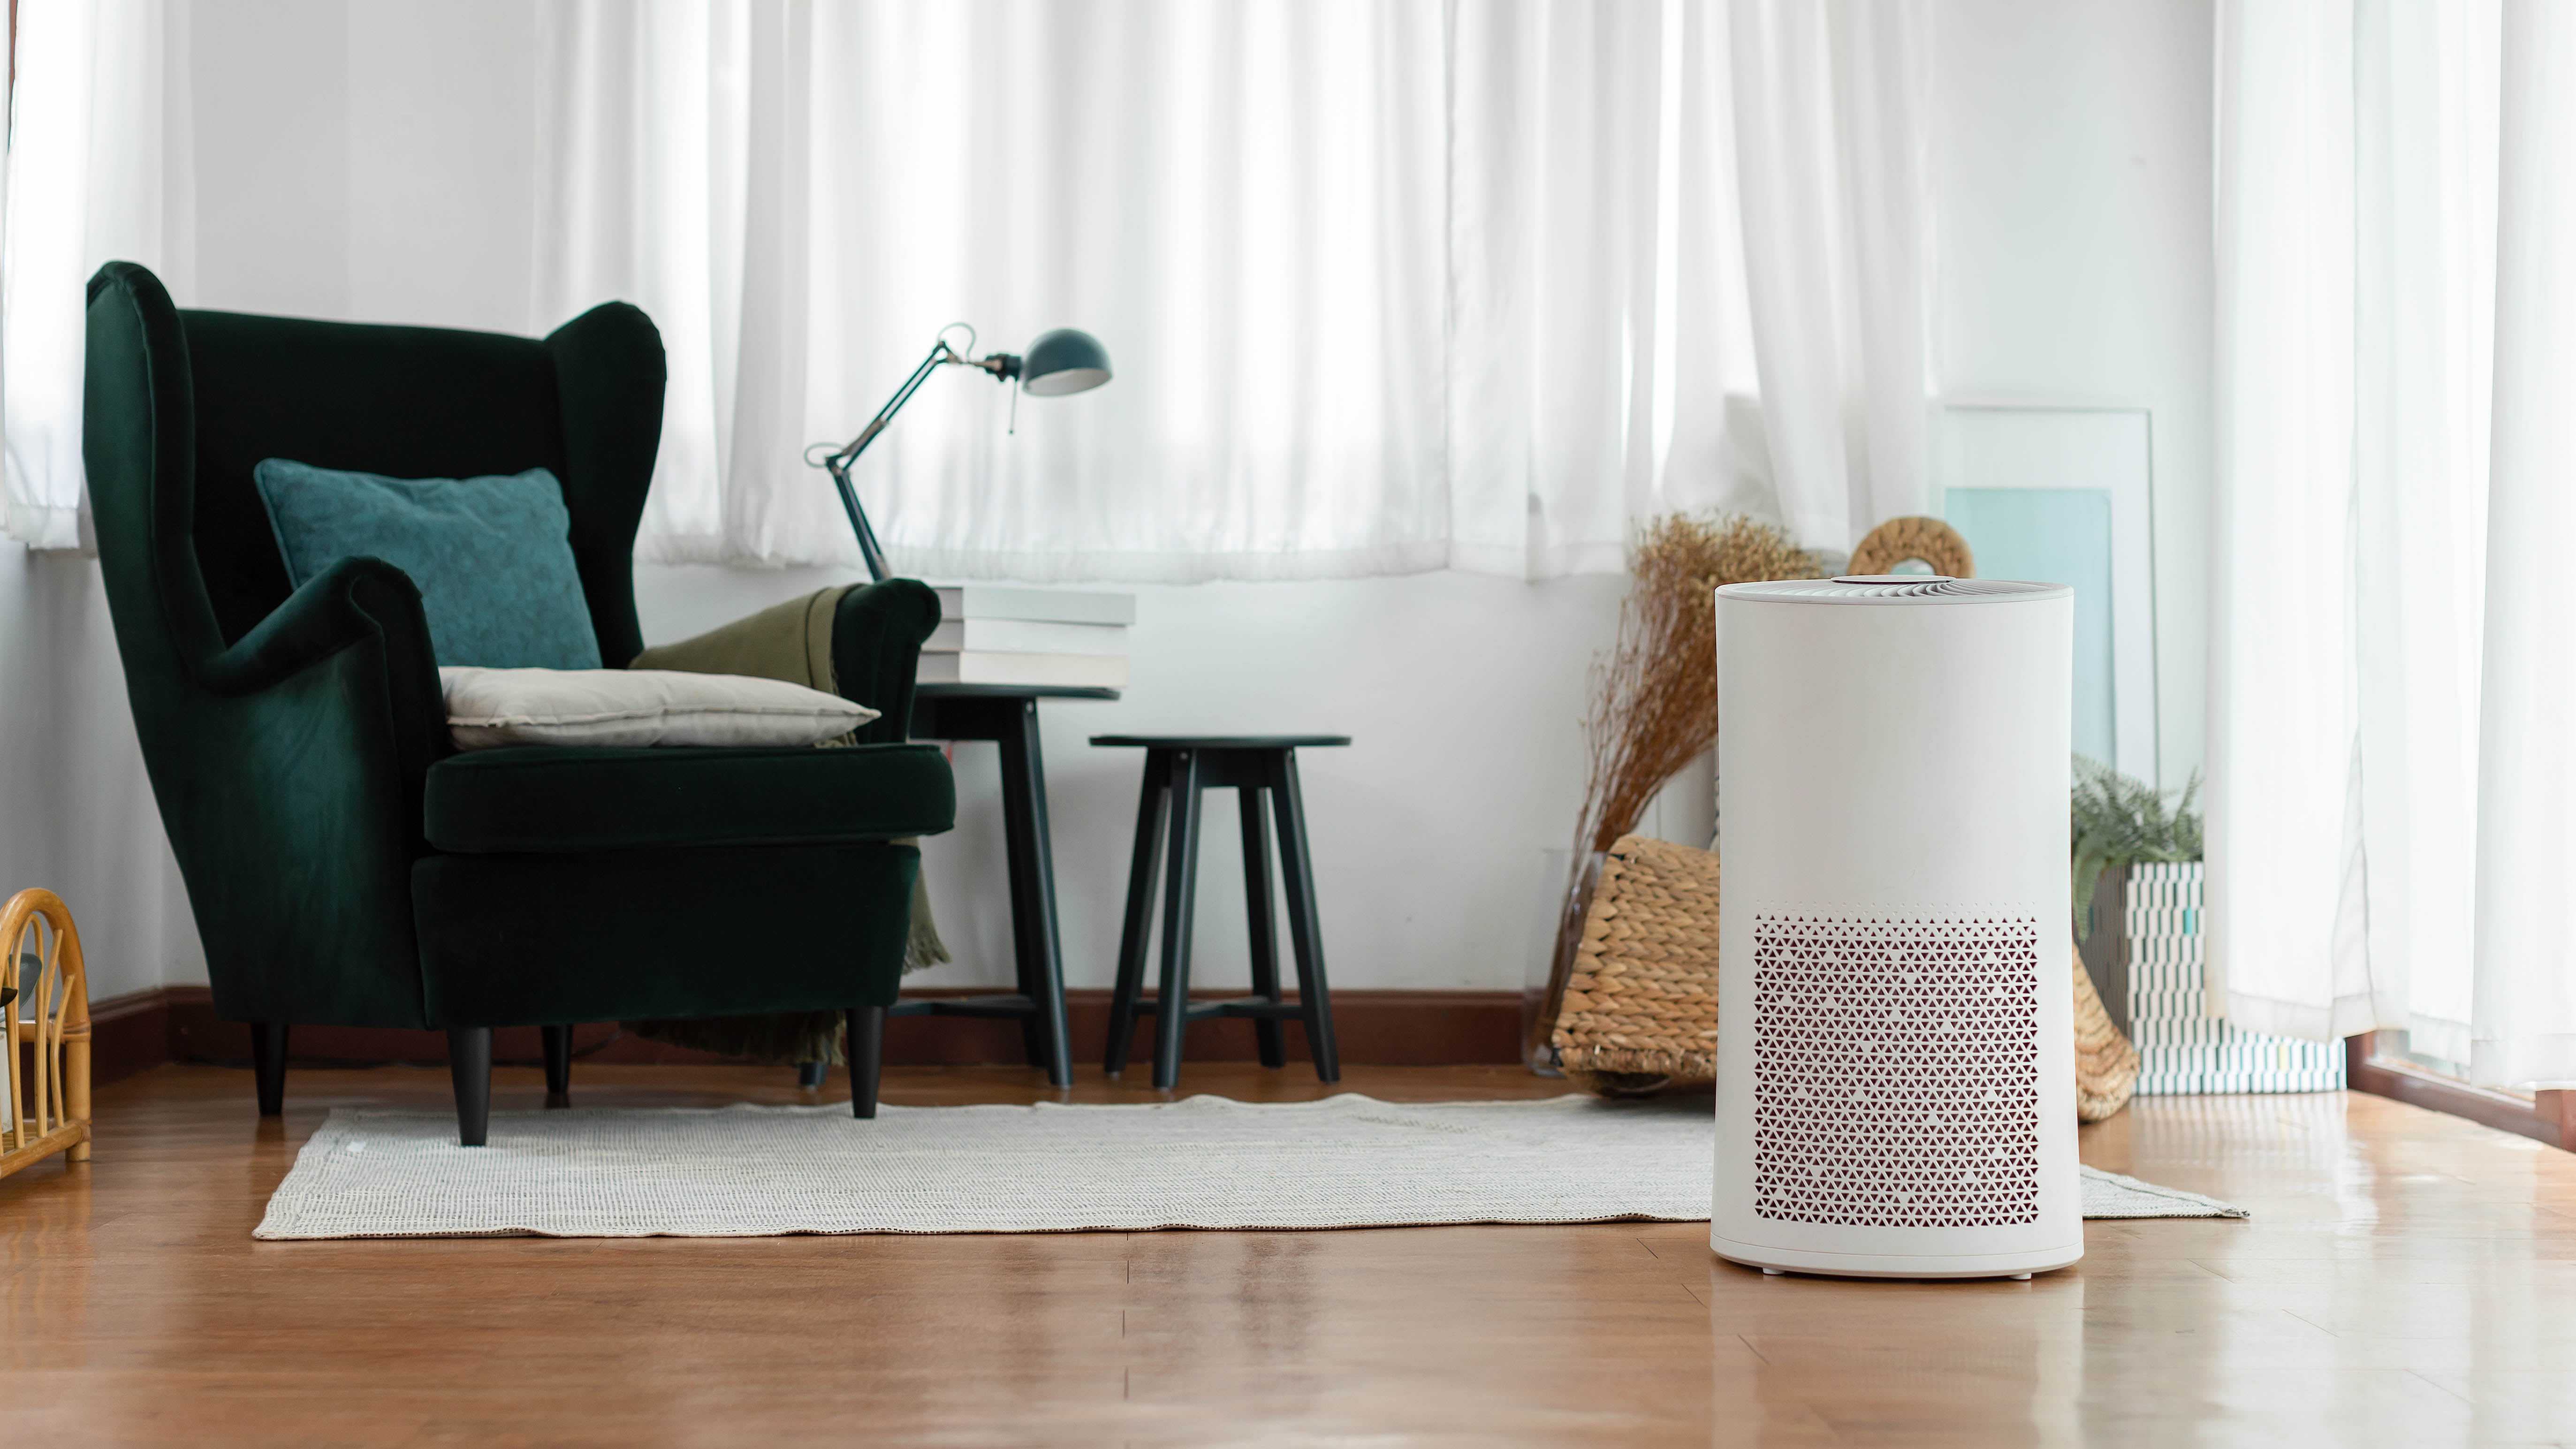 An air purifier in a living room next to a chair, lamp and side table